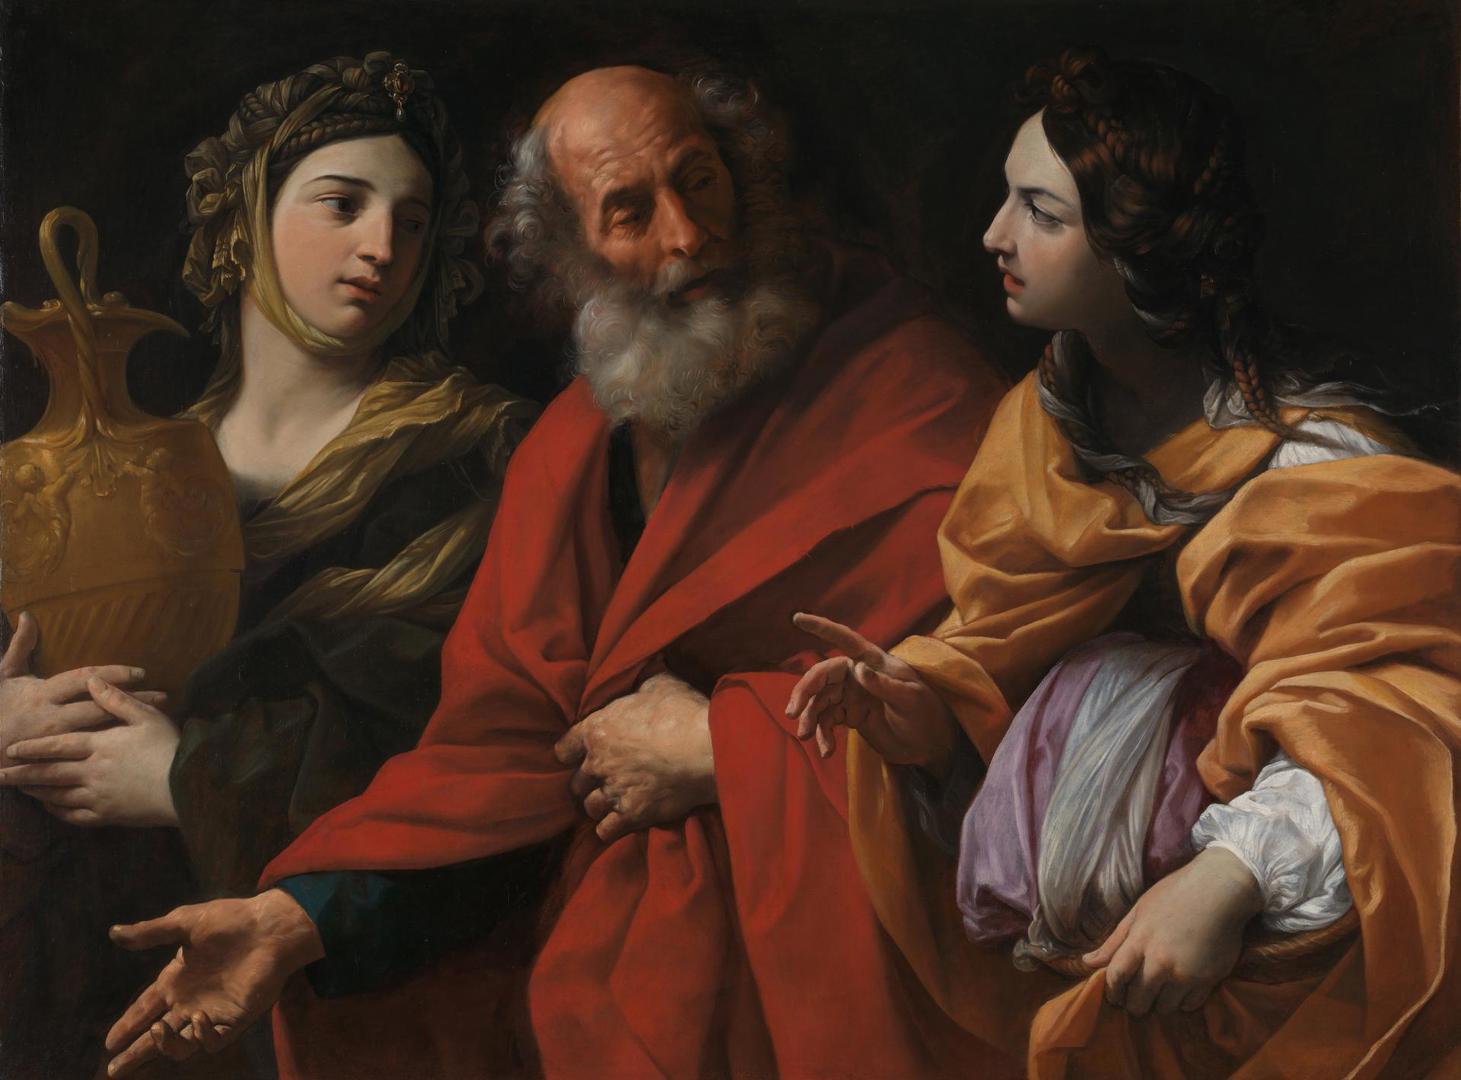 Lot and his Daughters leaving Sodom by Guido Reni